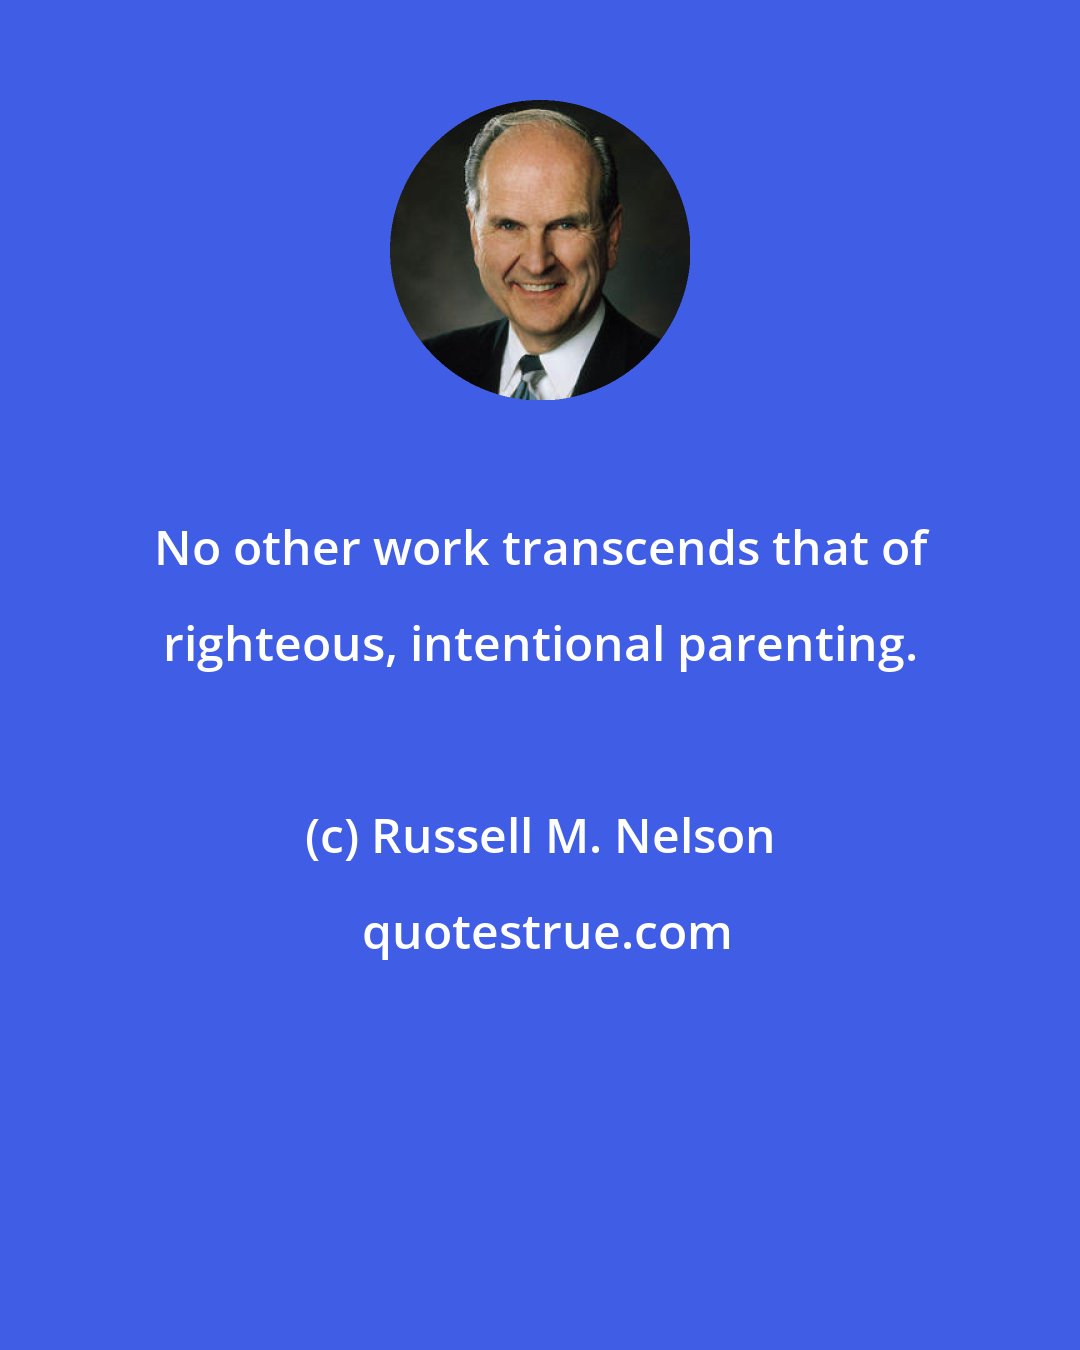 Russell M. Nelson: No other work transcends that of righteous, intentional parenting.